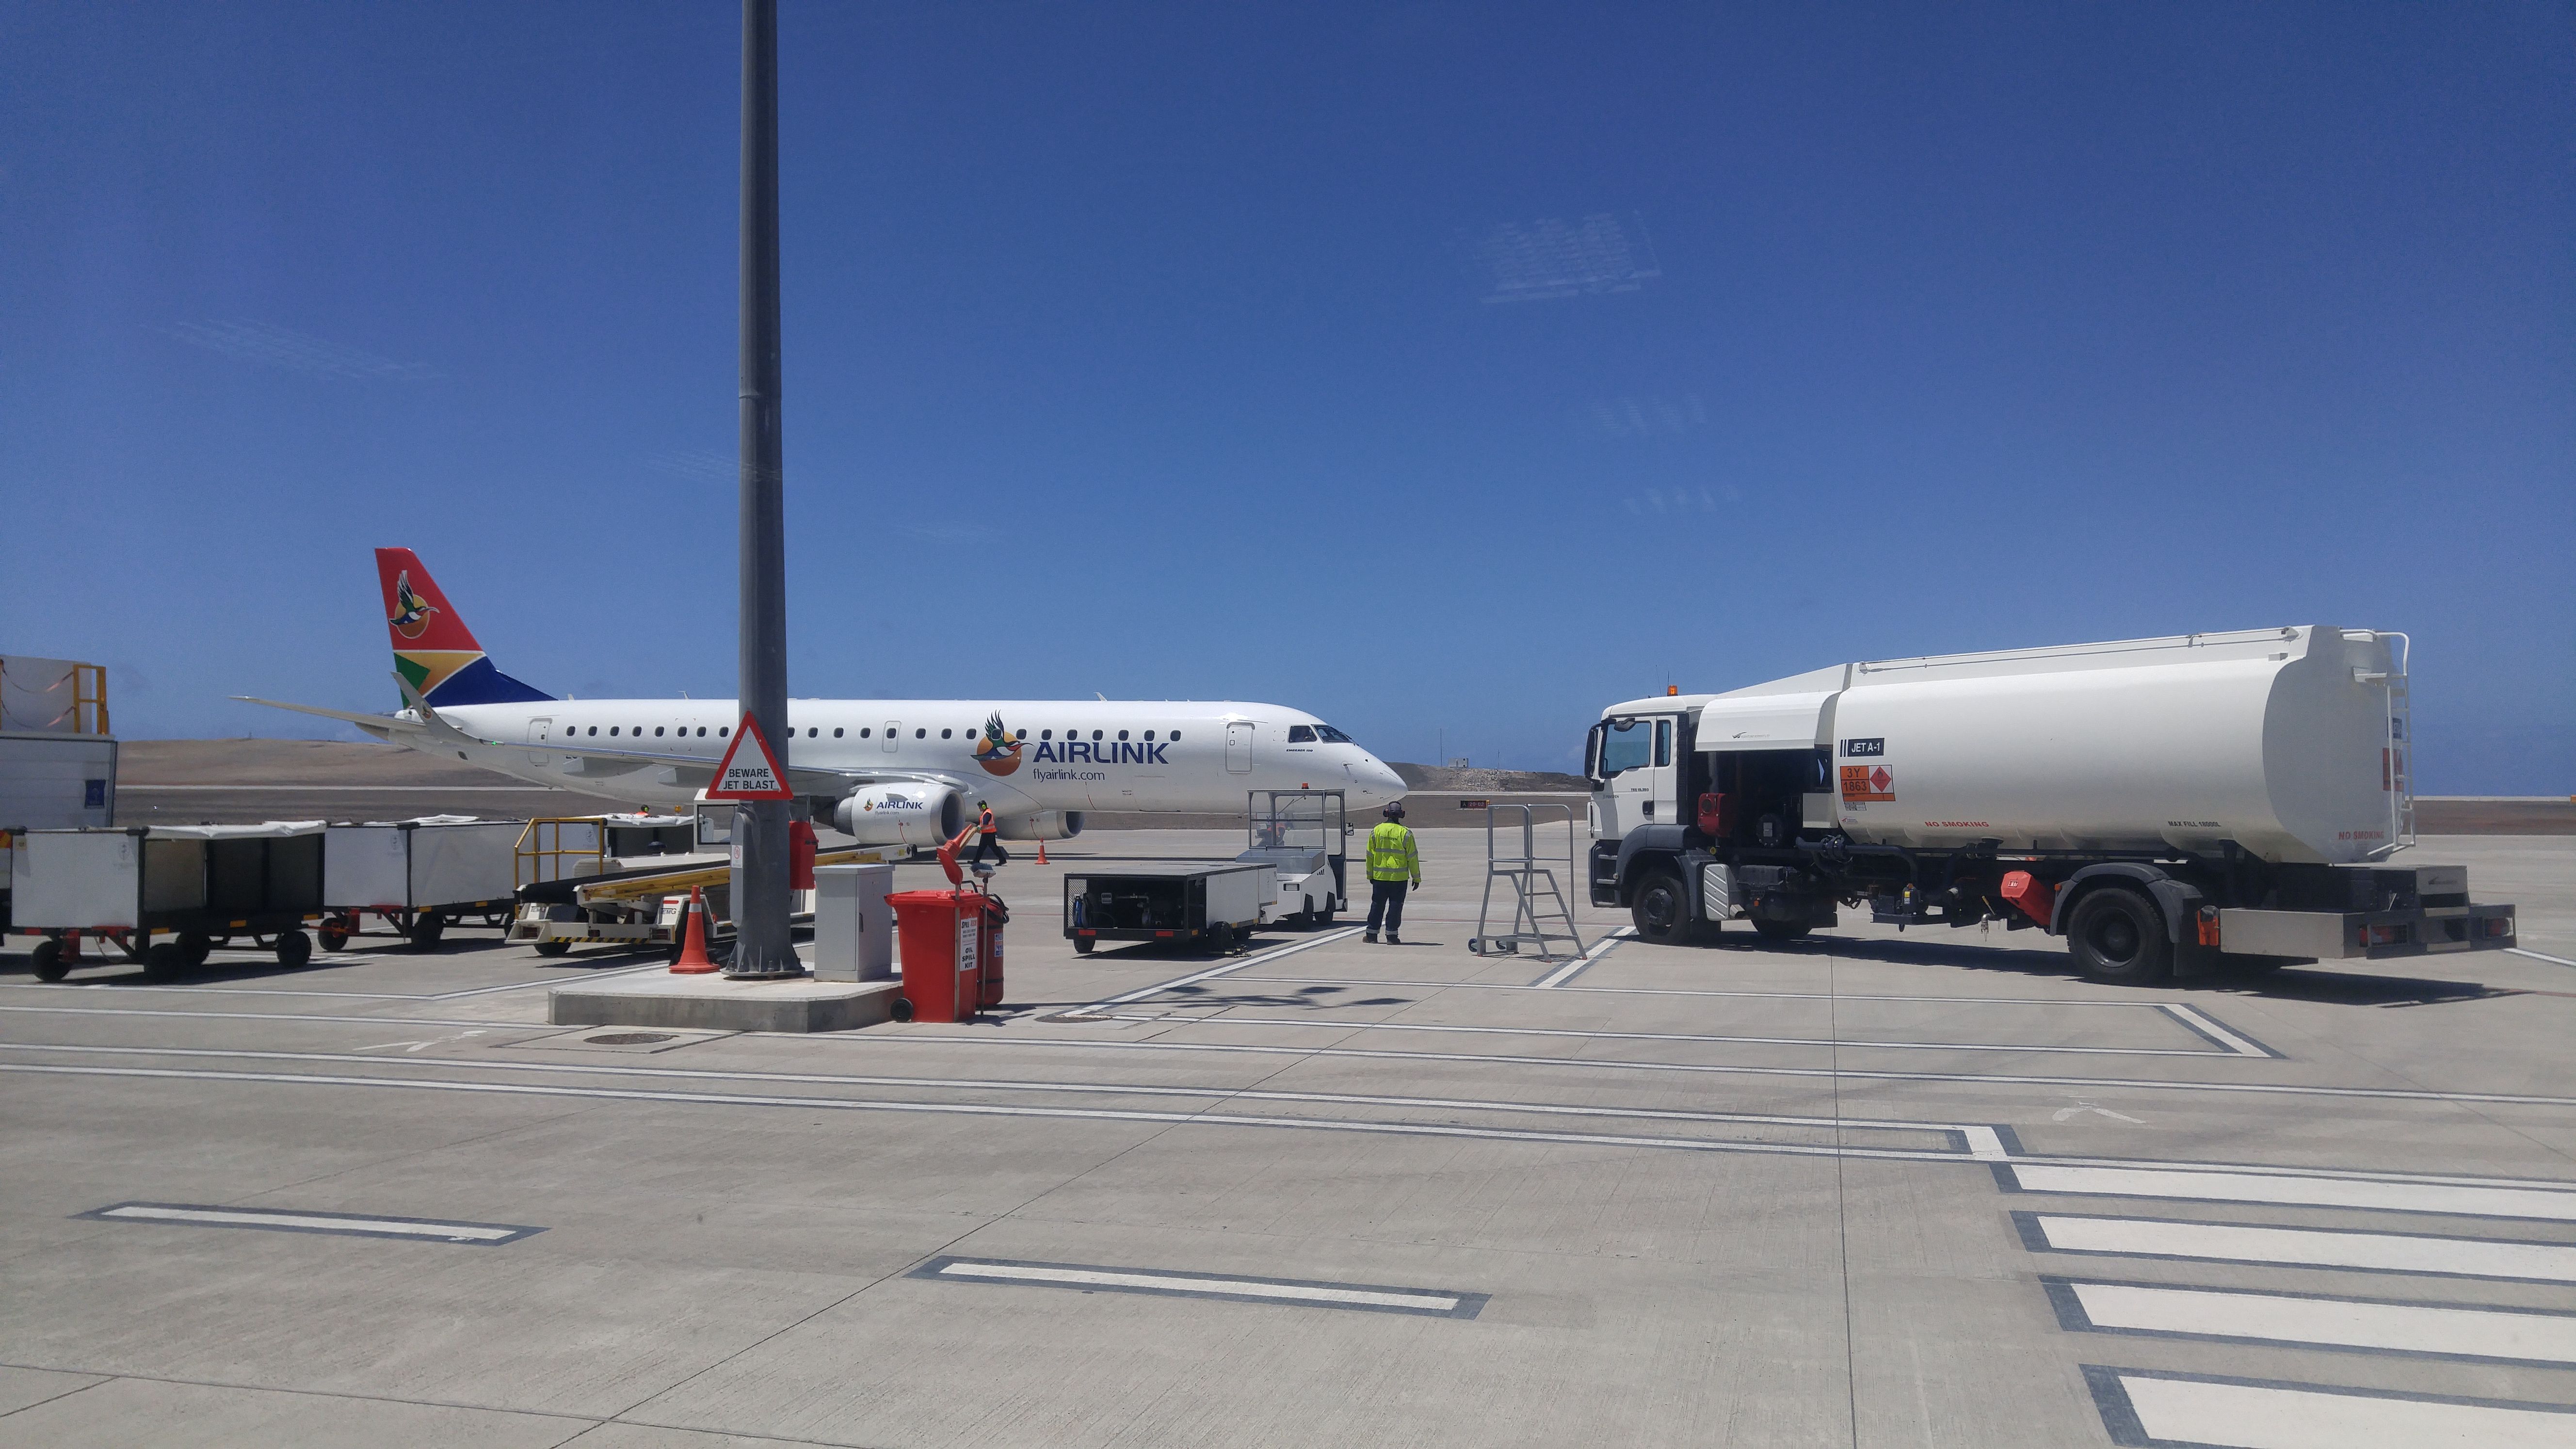 Airlink Embraer E190 refueling at Saint Helena Airport